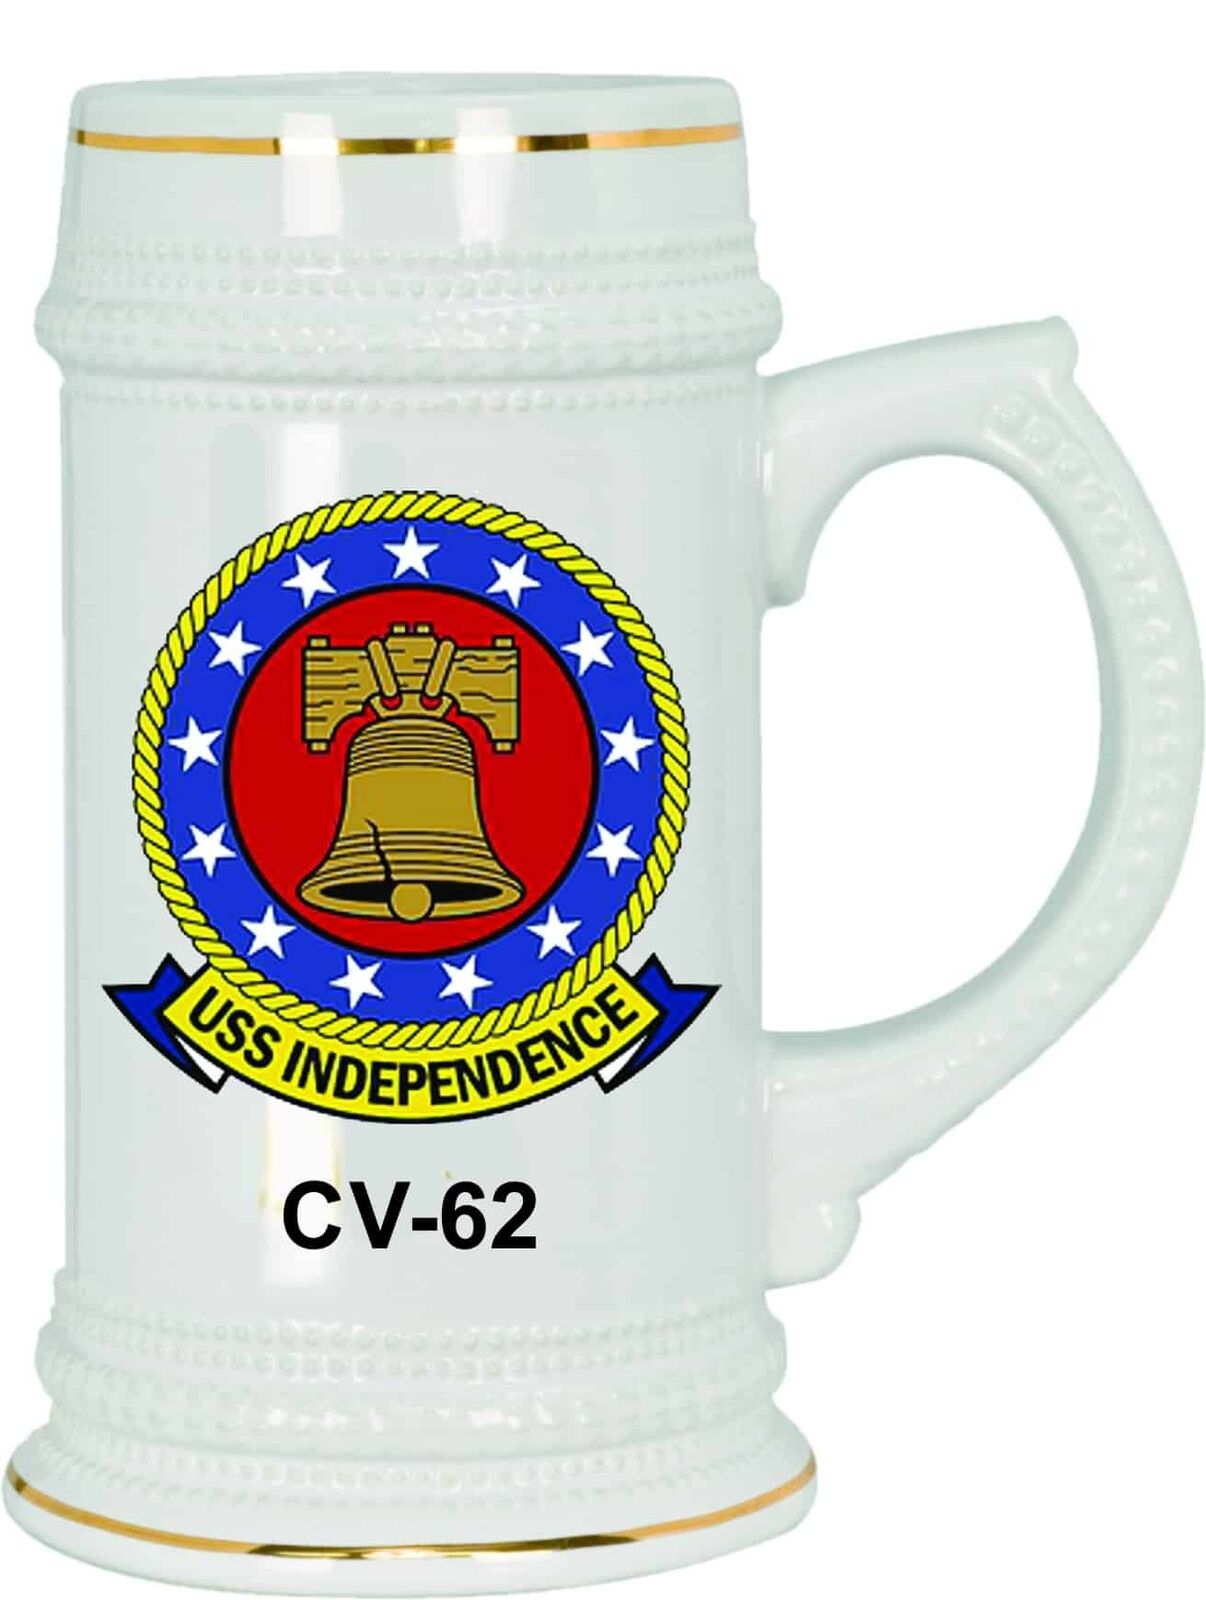 USS Independence CV-62 Stein, Ceramic, 18 ounces, Navy gift